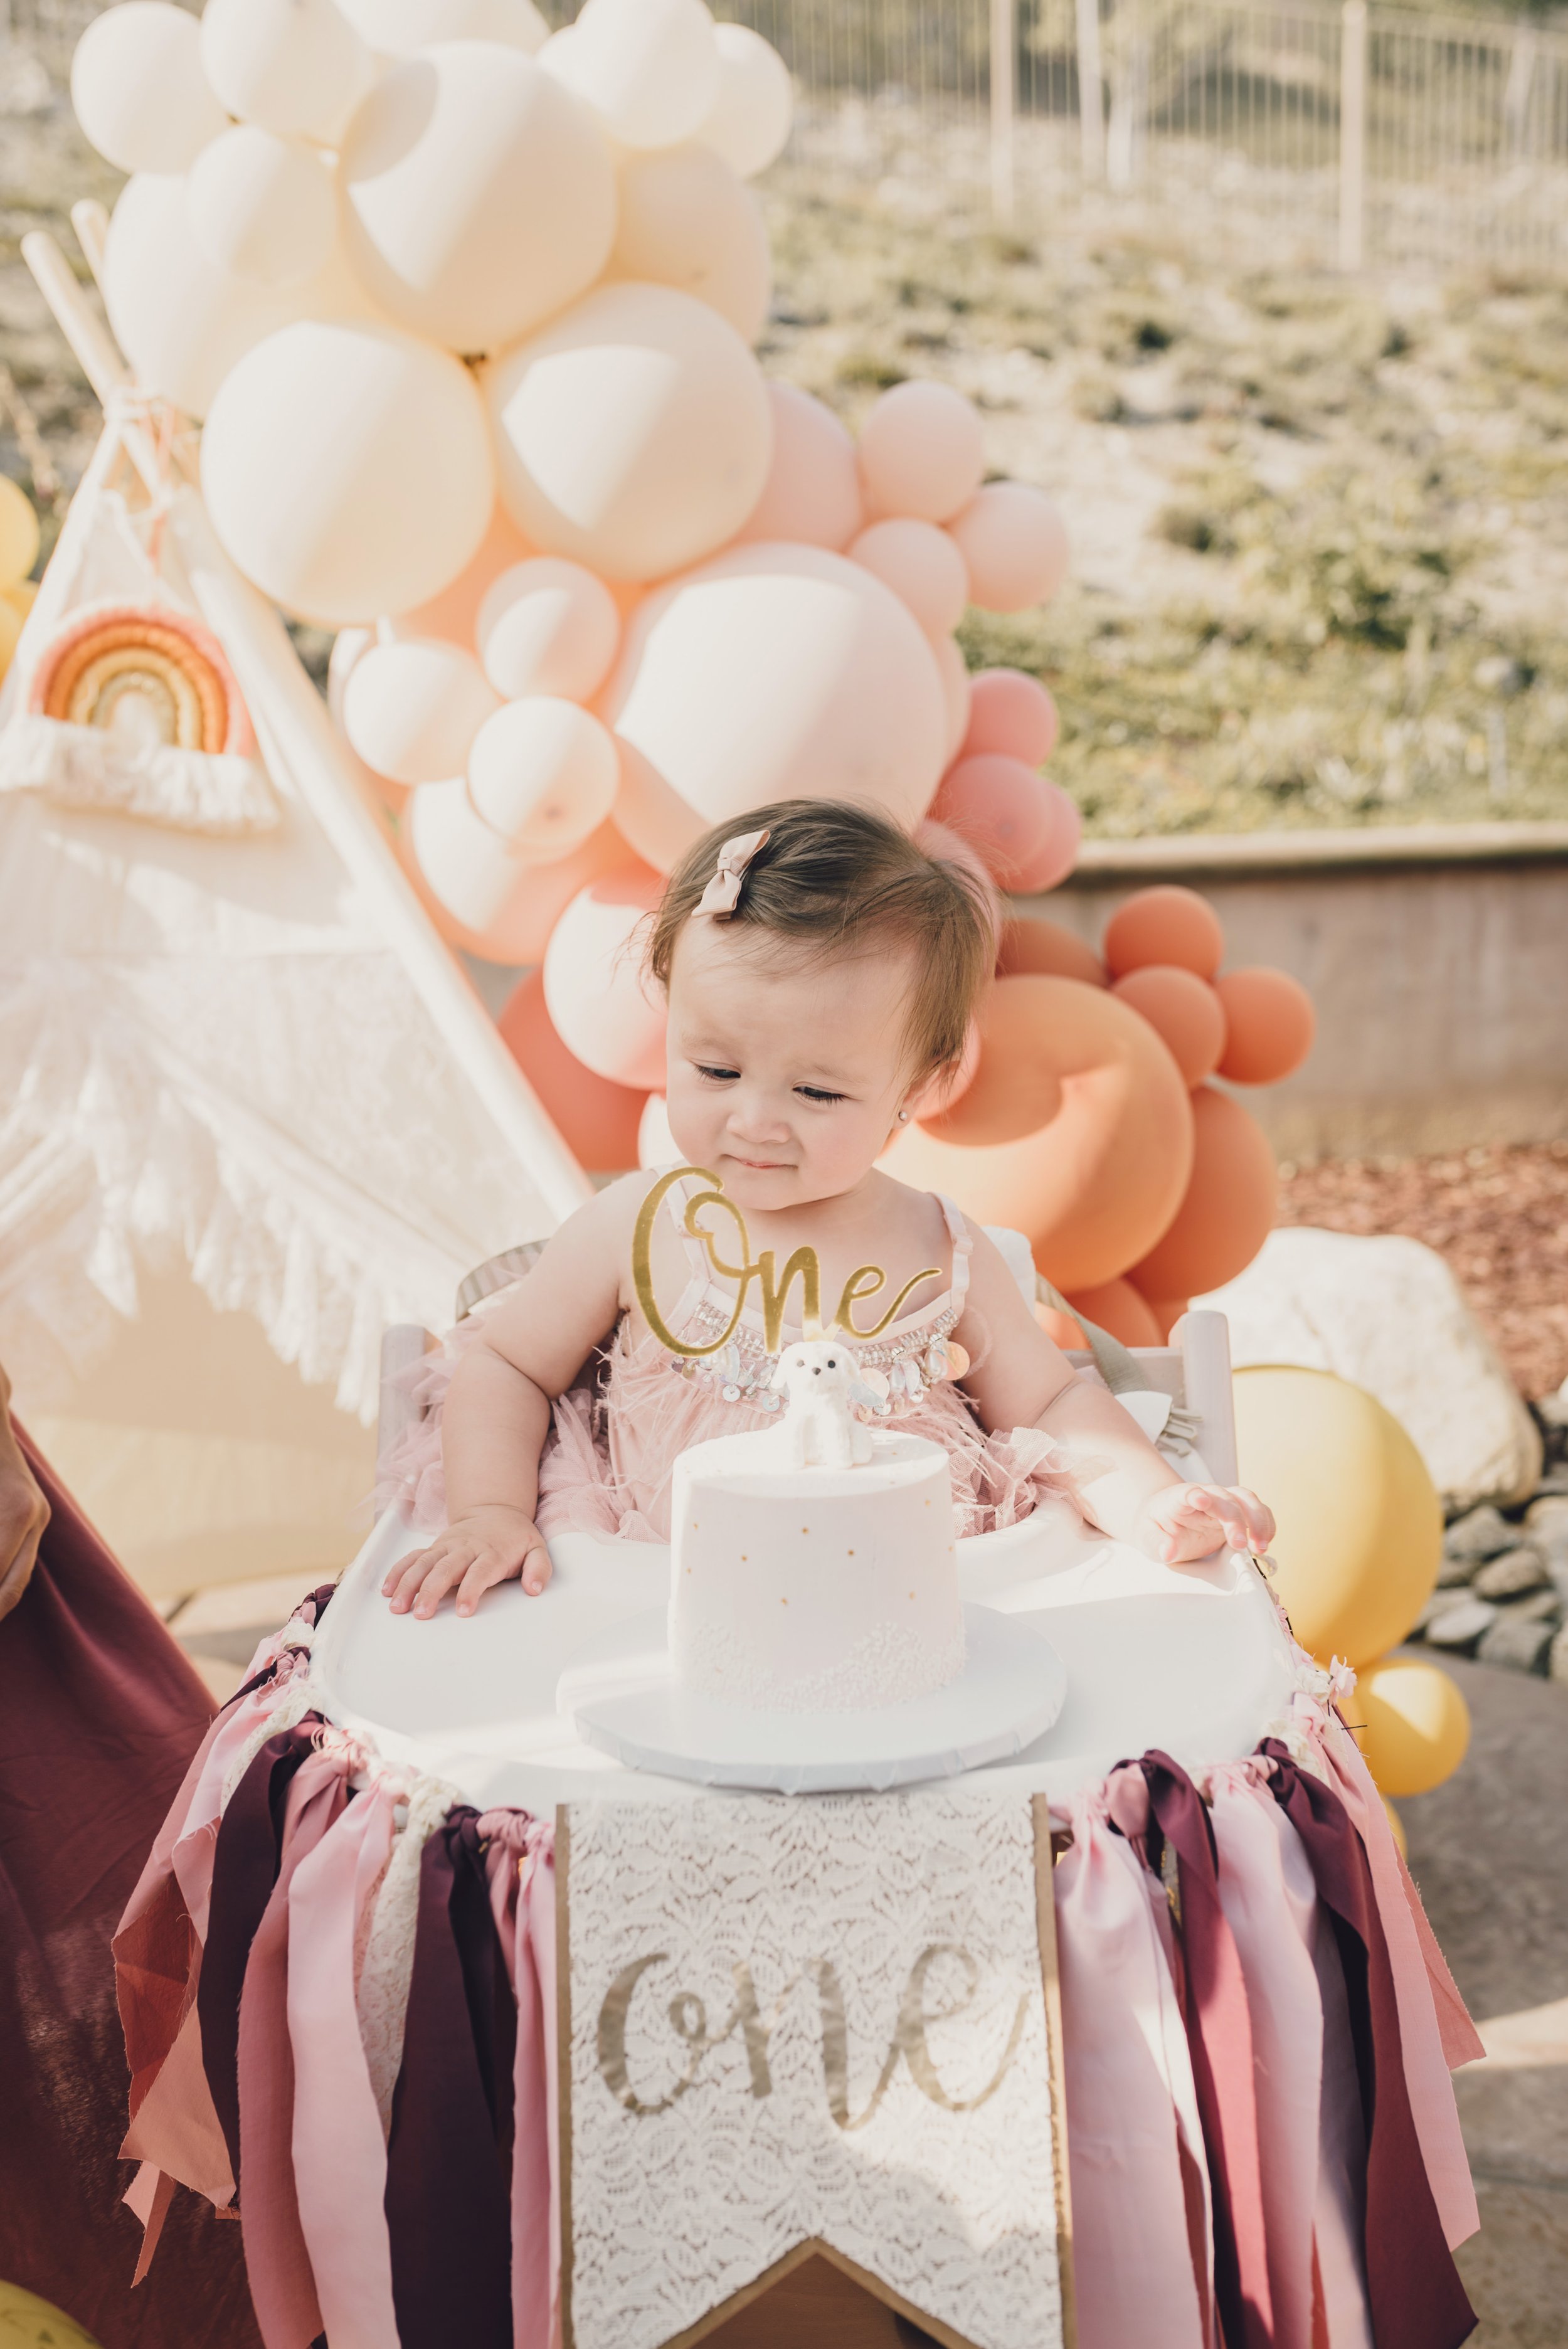 one-year-old-birthday-party-southern-california-family-photographer-41.jpg